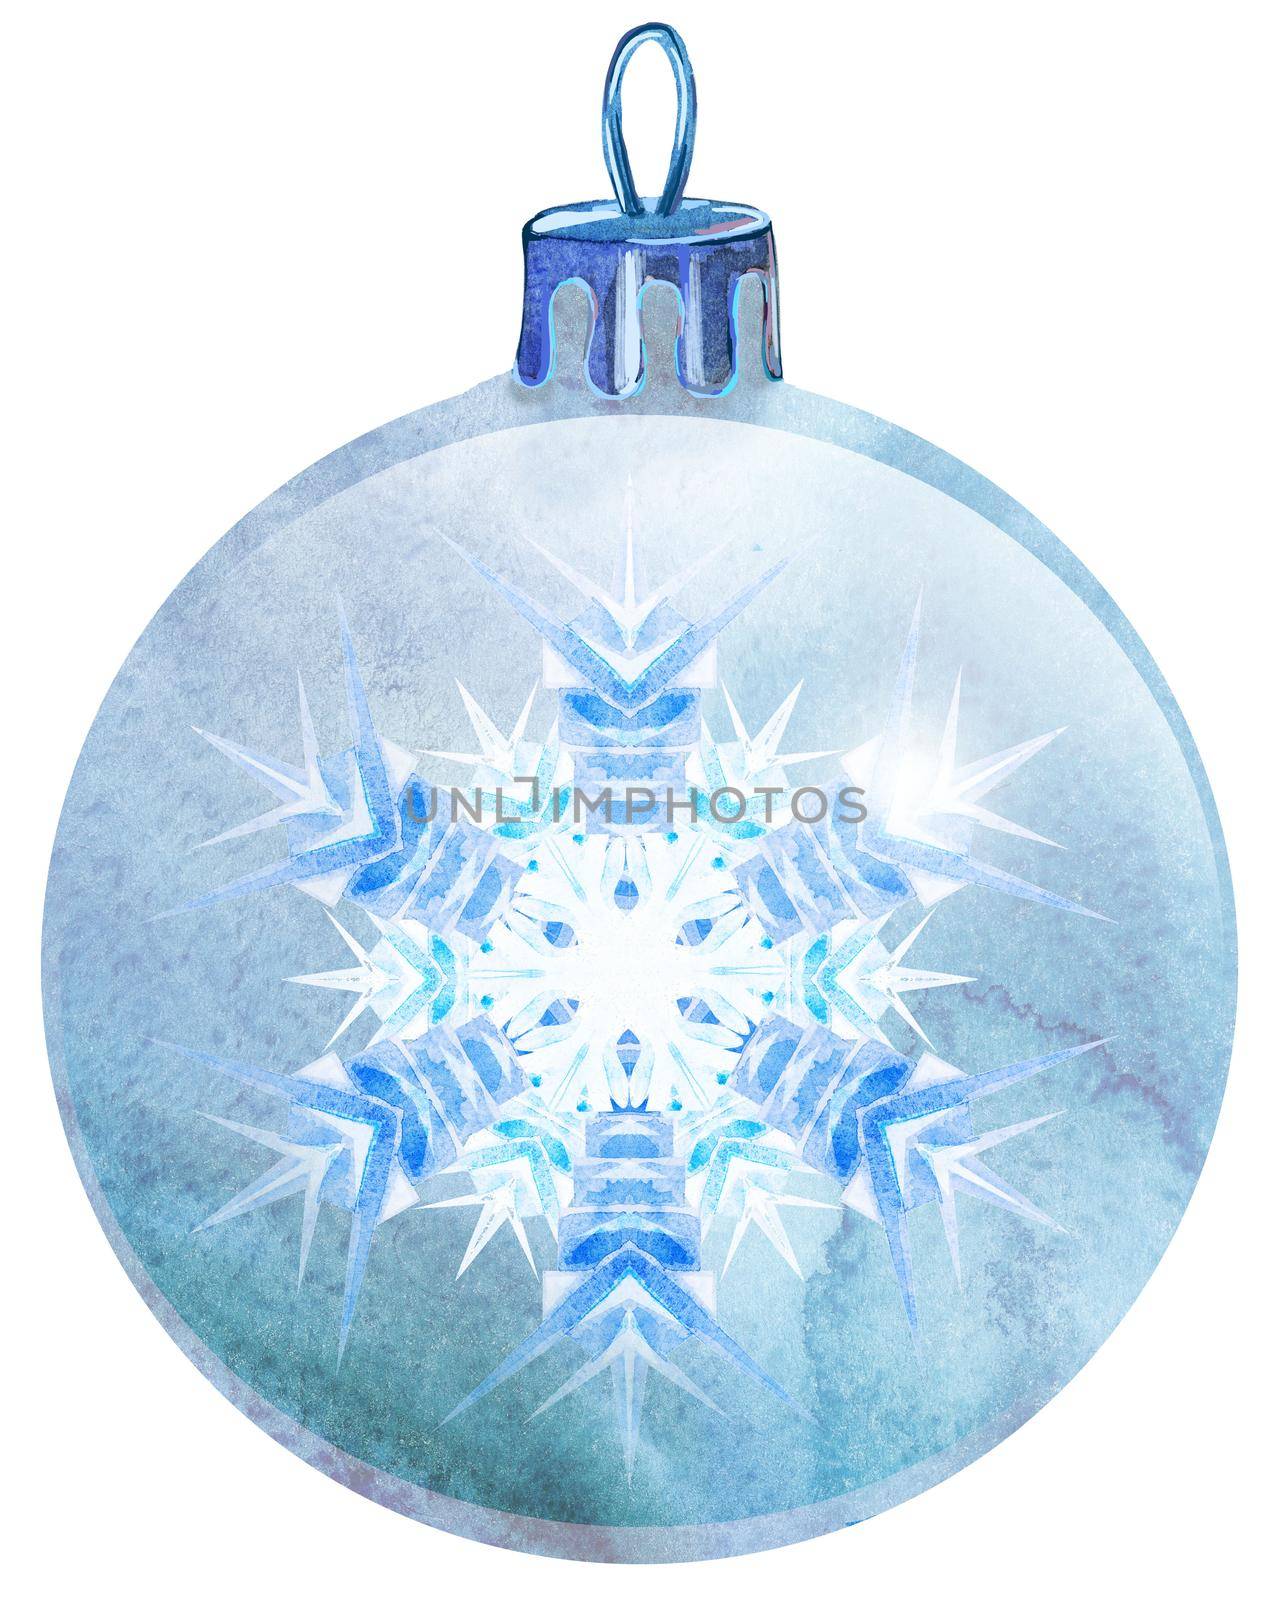 Watercolor Christmas white ball with snowlake isolated on a white background.